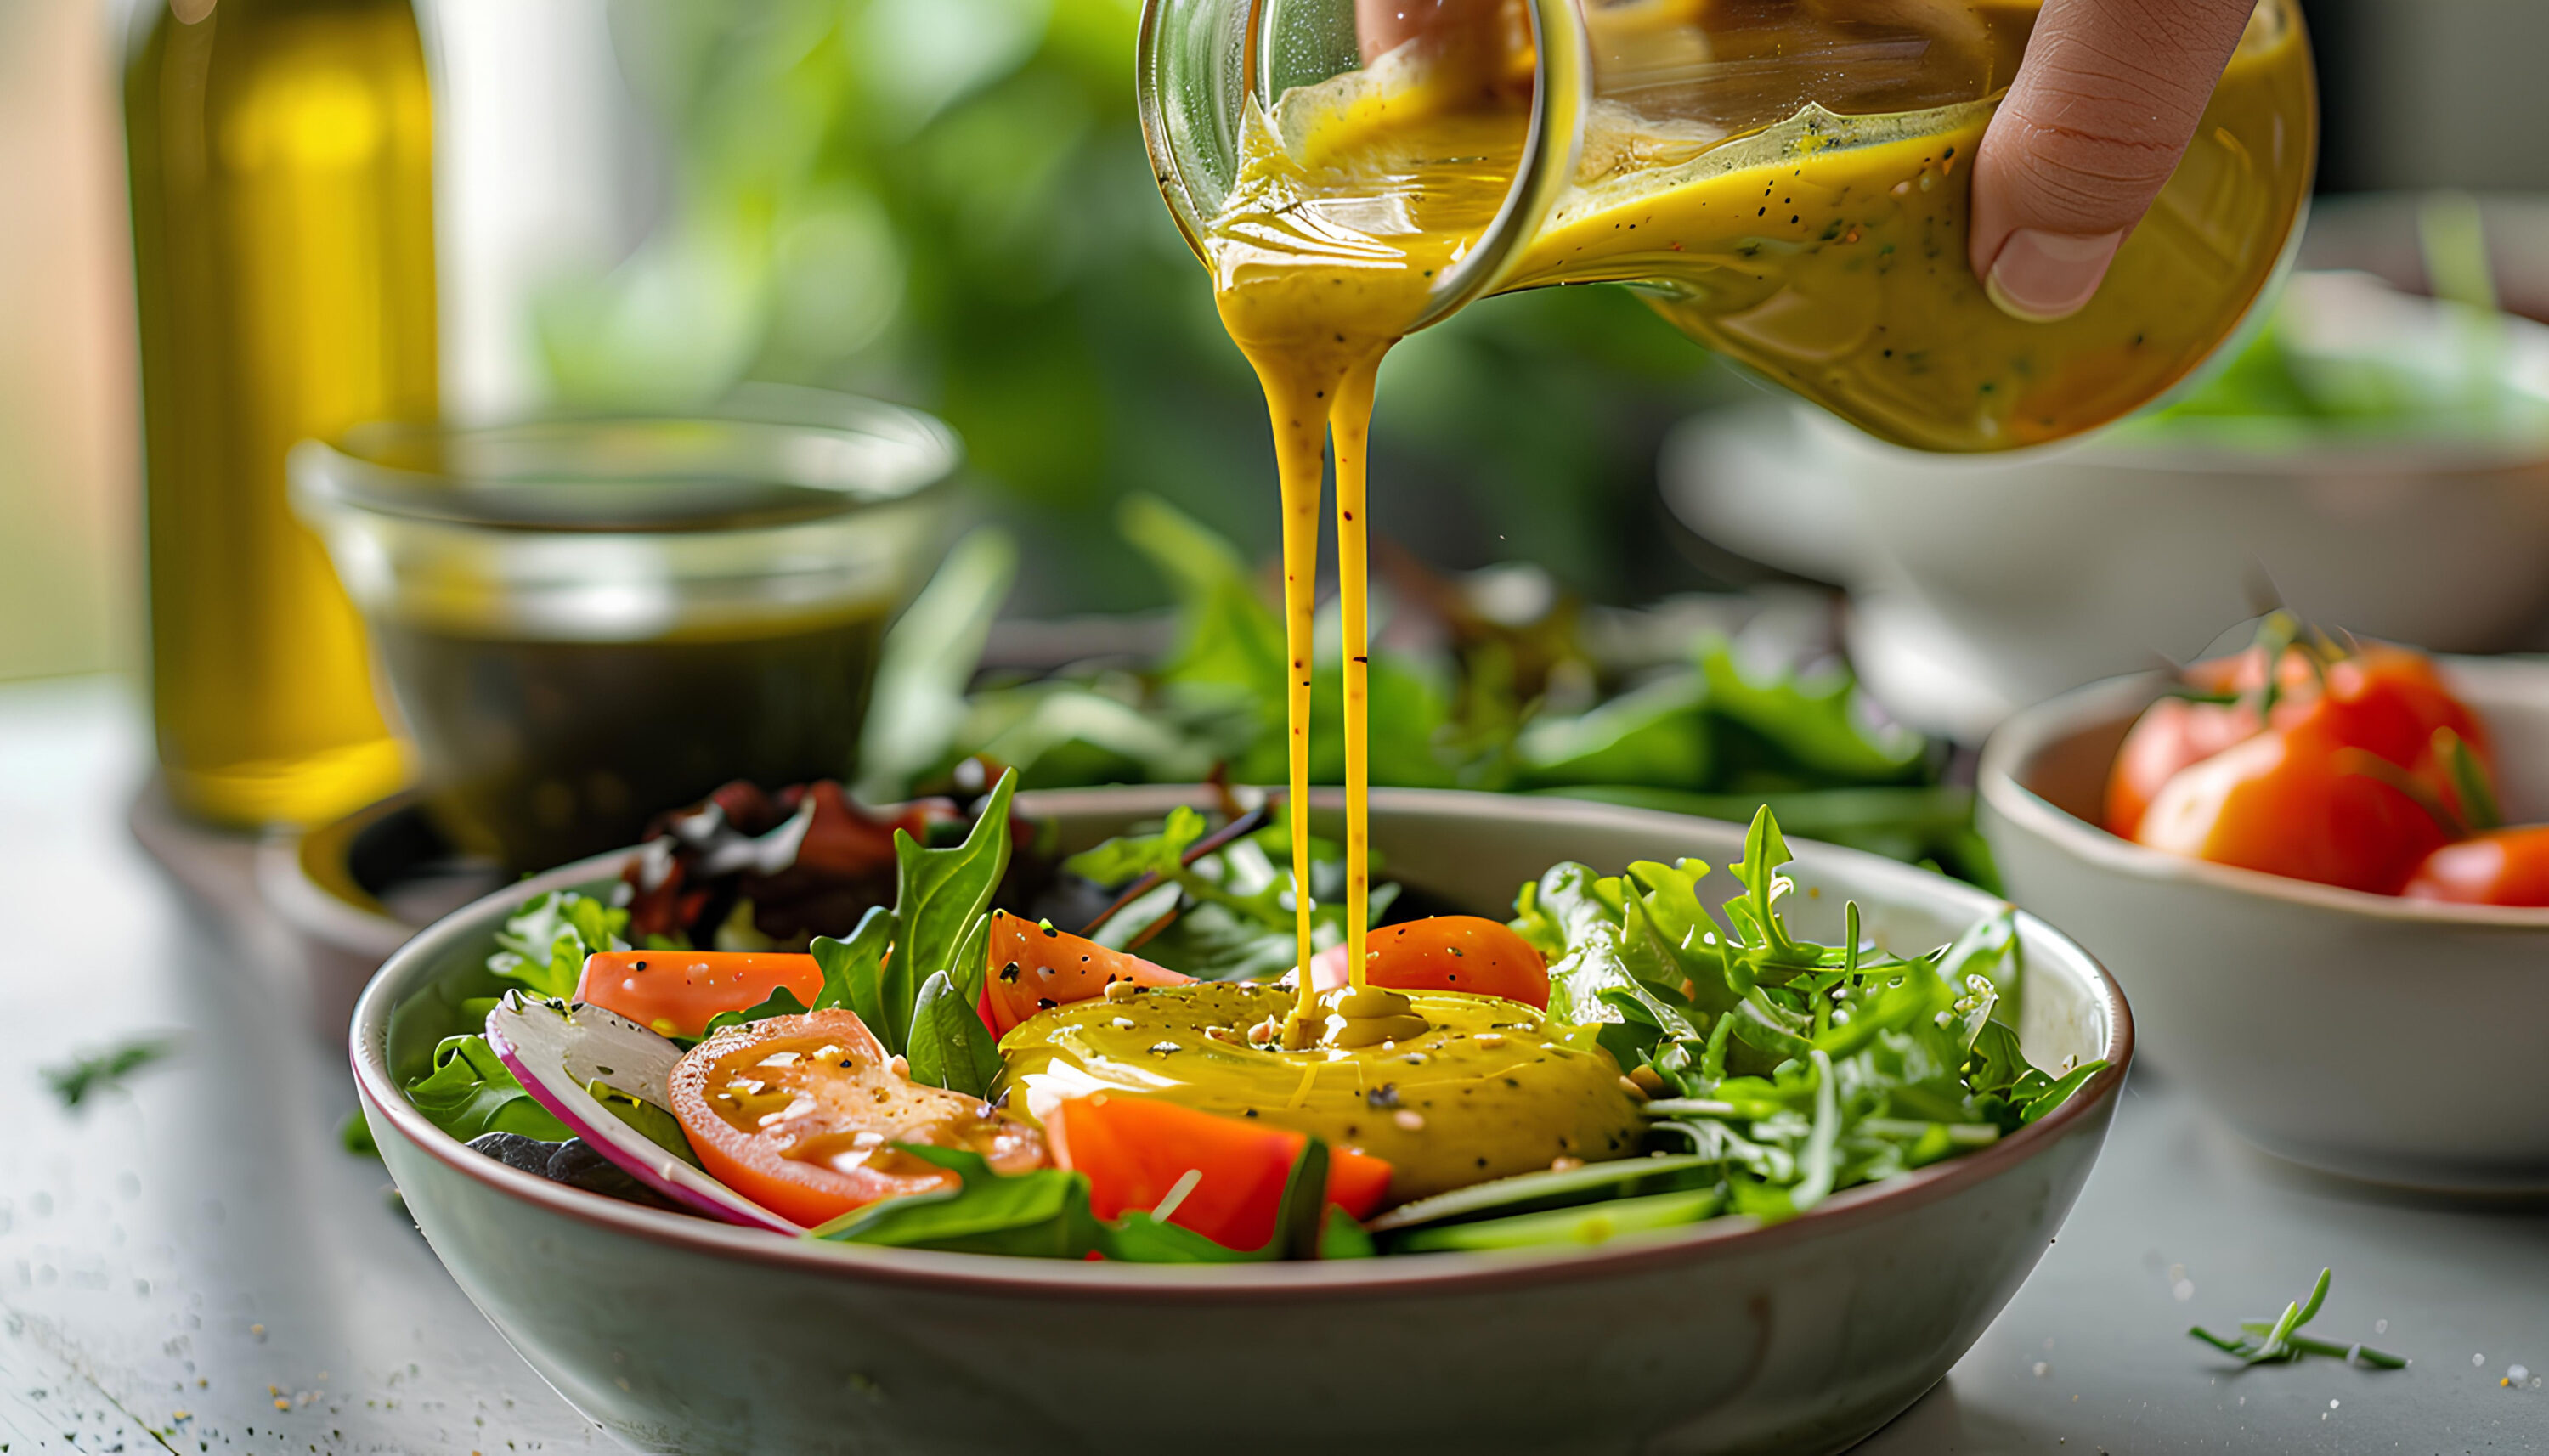 Woman-hand-pouring-honey-mustard-dressing-into-bowl-with-fresh-salad-on-table